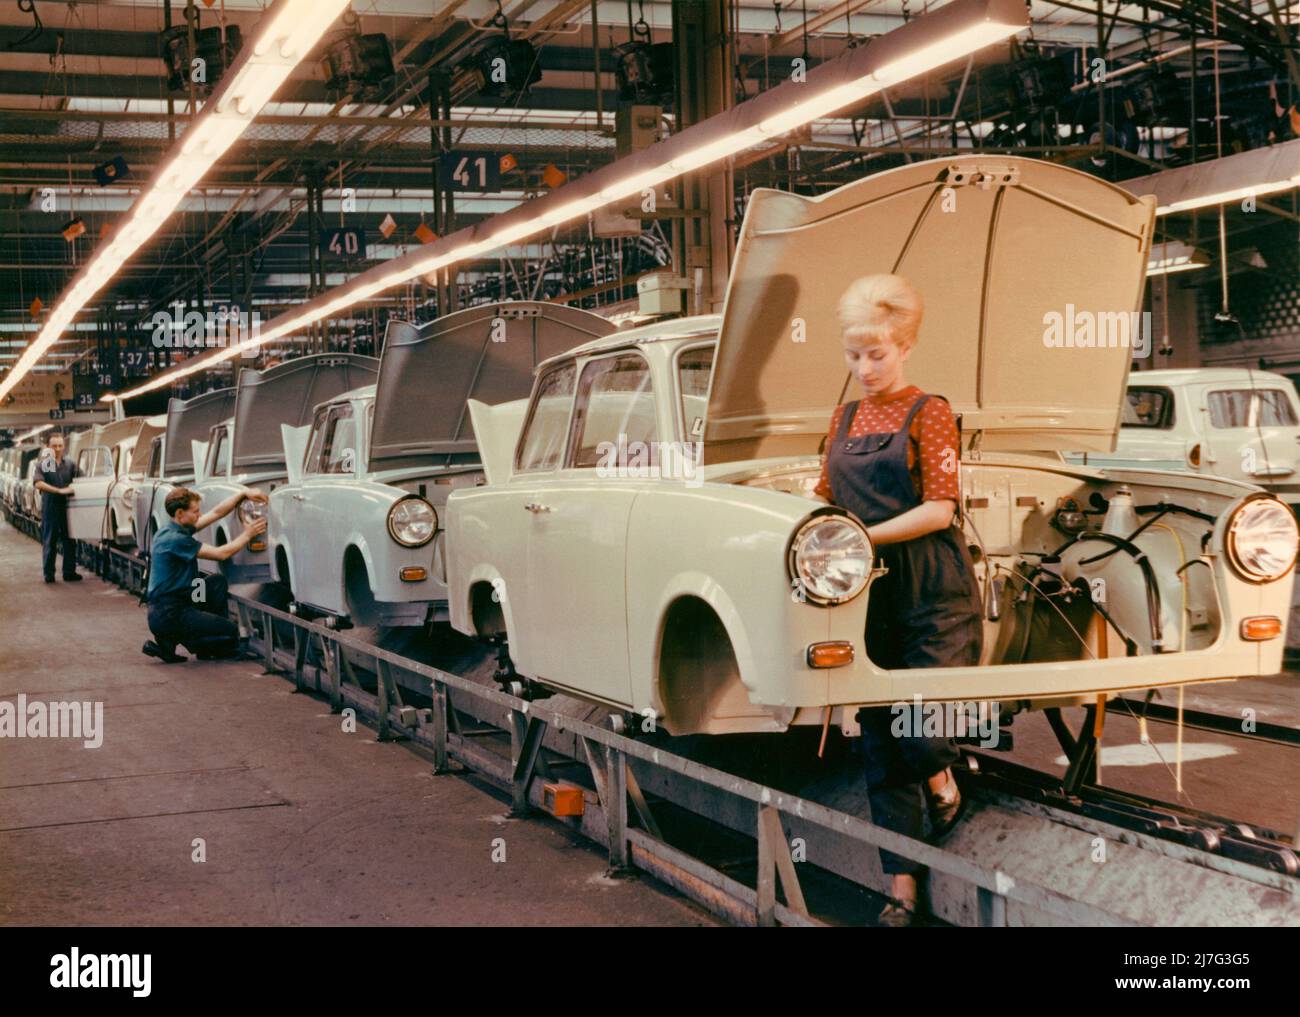 The Trabant car. East German VEB Sachsenring Automobilwerk. Trabant began manufacturing 1957 and production lasted until 1991. A total of 3 051385 Trabants were made. Trabant was developed as East Germanys answer to Volkswagen and the vision of a car for the people. It was called Trabbi or Trabi and became the most common car in East Germany. Trabant came to be somewhat of a symbol for East Germany during the time of the fall of the Berlin wall. Picture taken in Trabant carfactory in Sachsen in the 1960s. The young woman standing at the assembly line has the typical hairdo of the 1960s, the Be Stock Photo